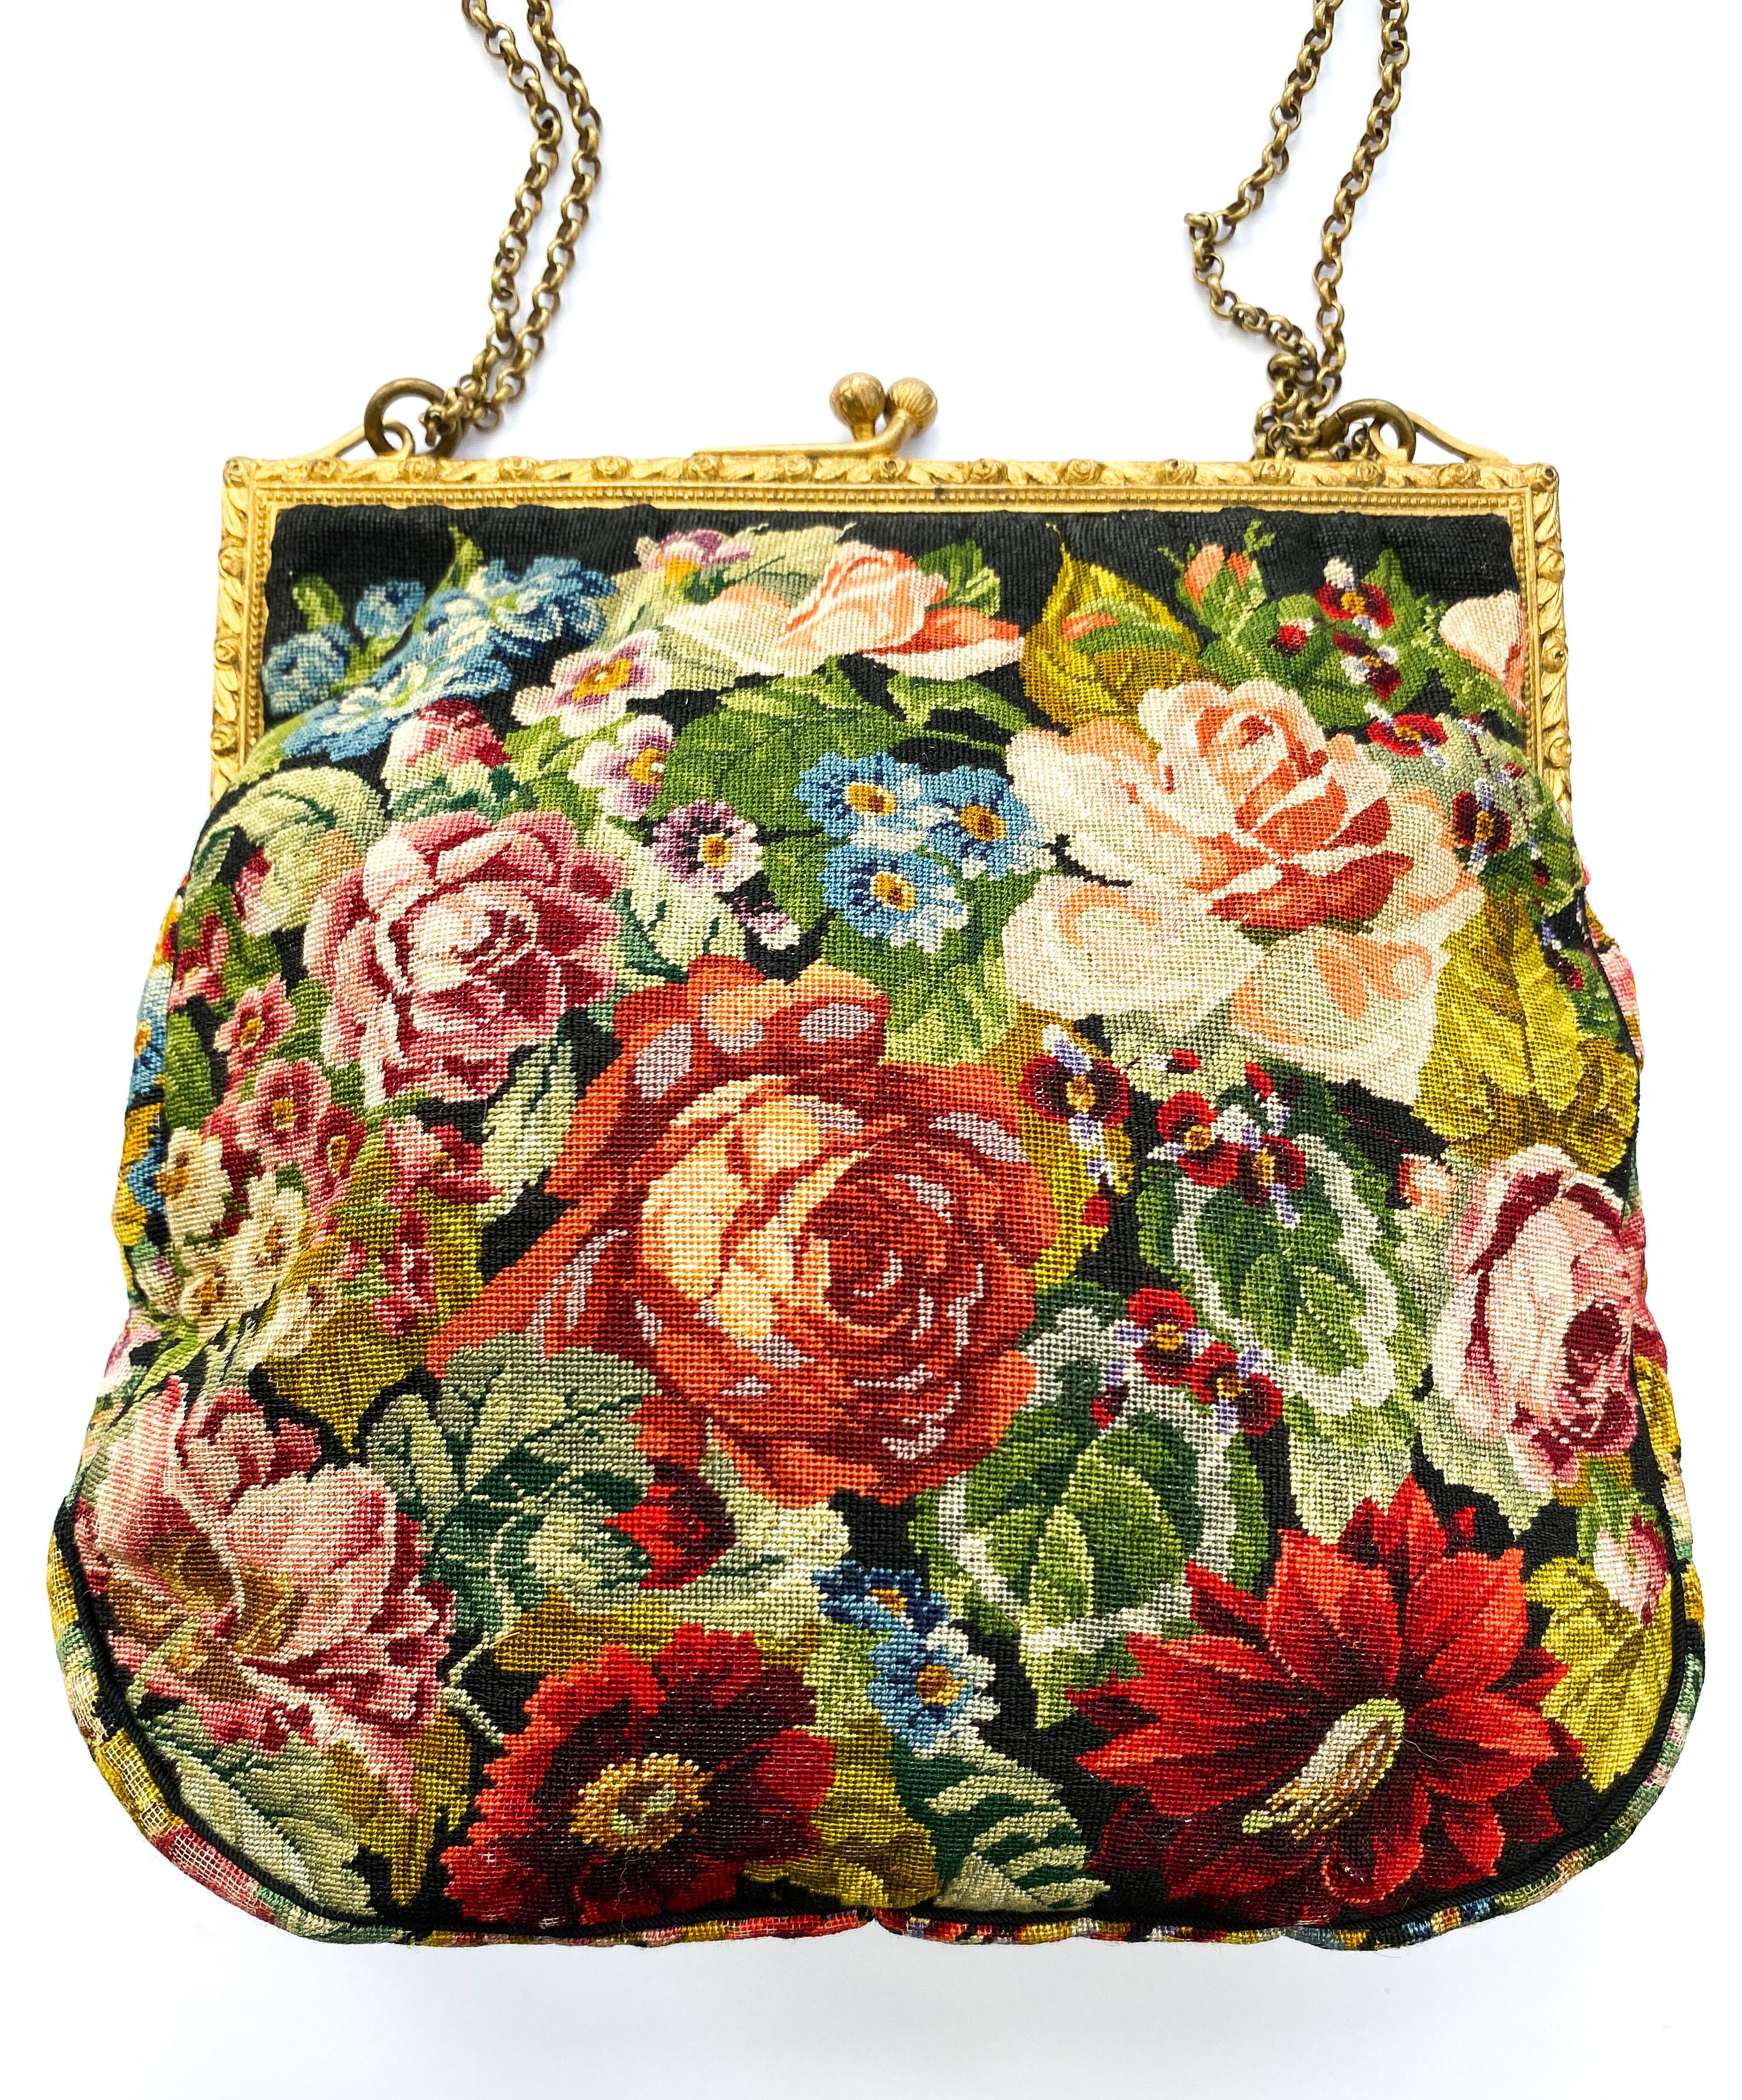 A charming and highly attractive handbag, perfect for evening or that special occasion. the needlepoint is of the highest and finest quality with roses and a variety of other flowers, and foliage on both the front and back and gusset. The frame is